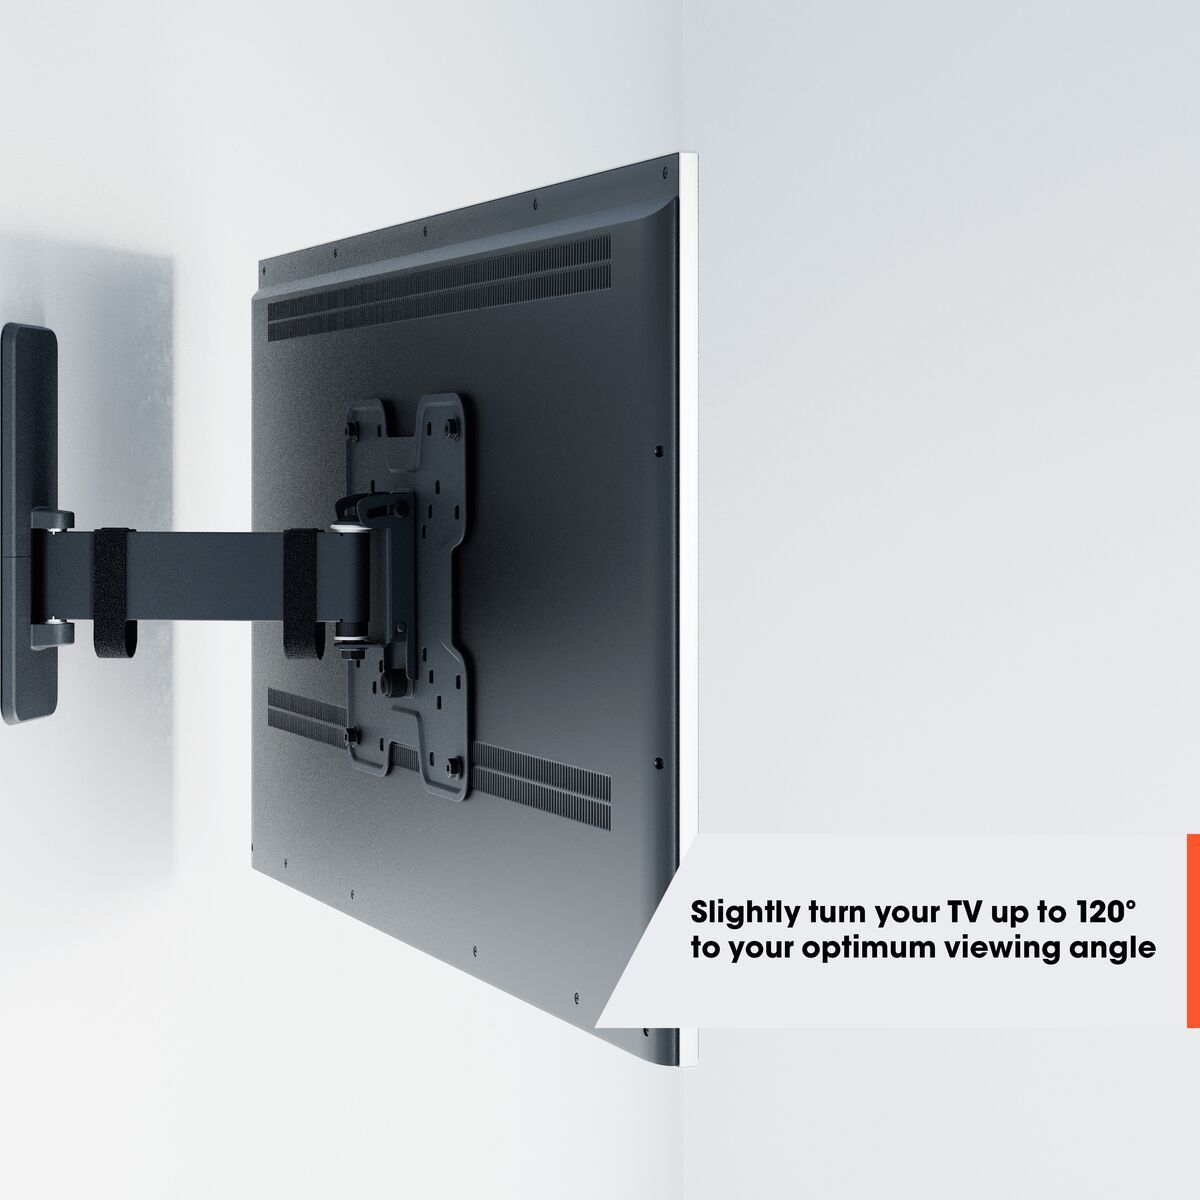 Vogel's TVM 1425 Full-Motion TV Wall Mount - Suitable for 32 up to 65 inch TVs - Motion (up to 120°) swivel - Tilt up to 15° - USP